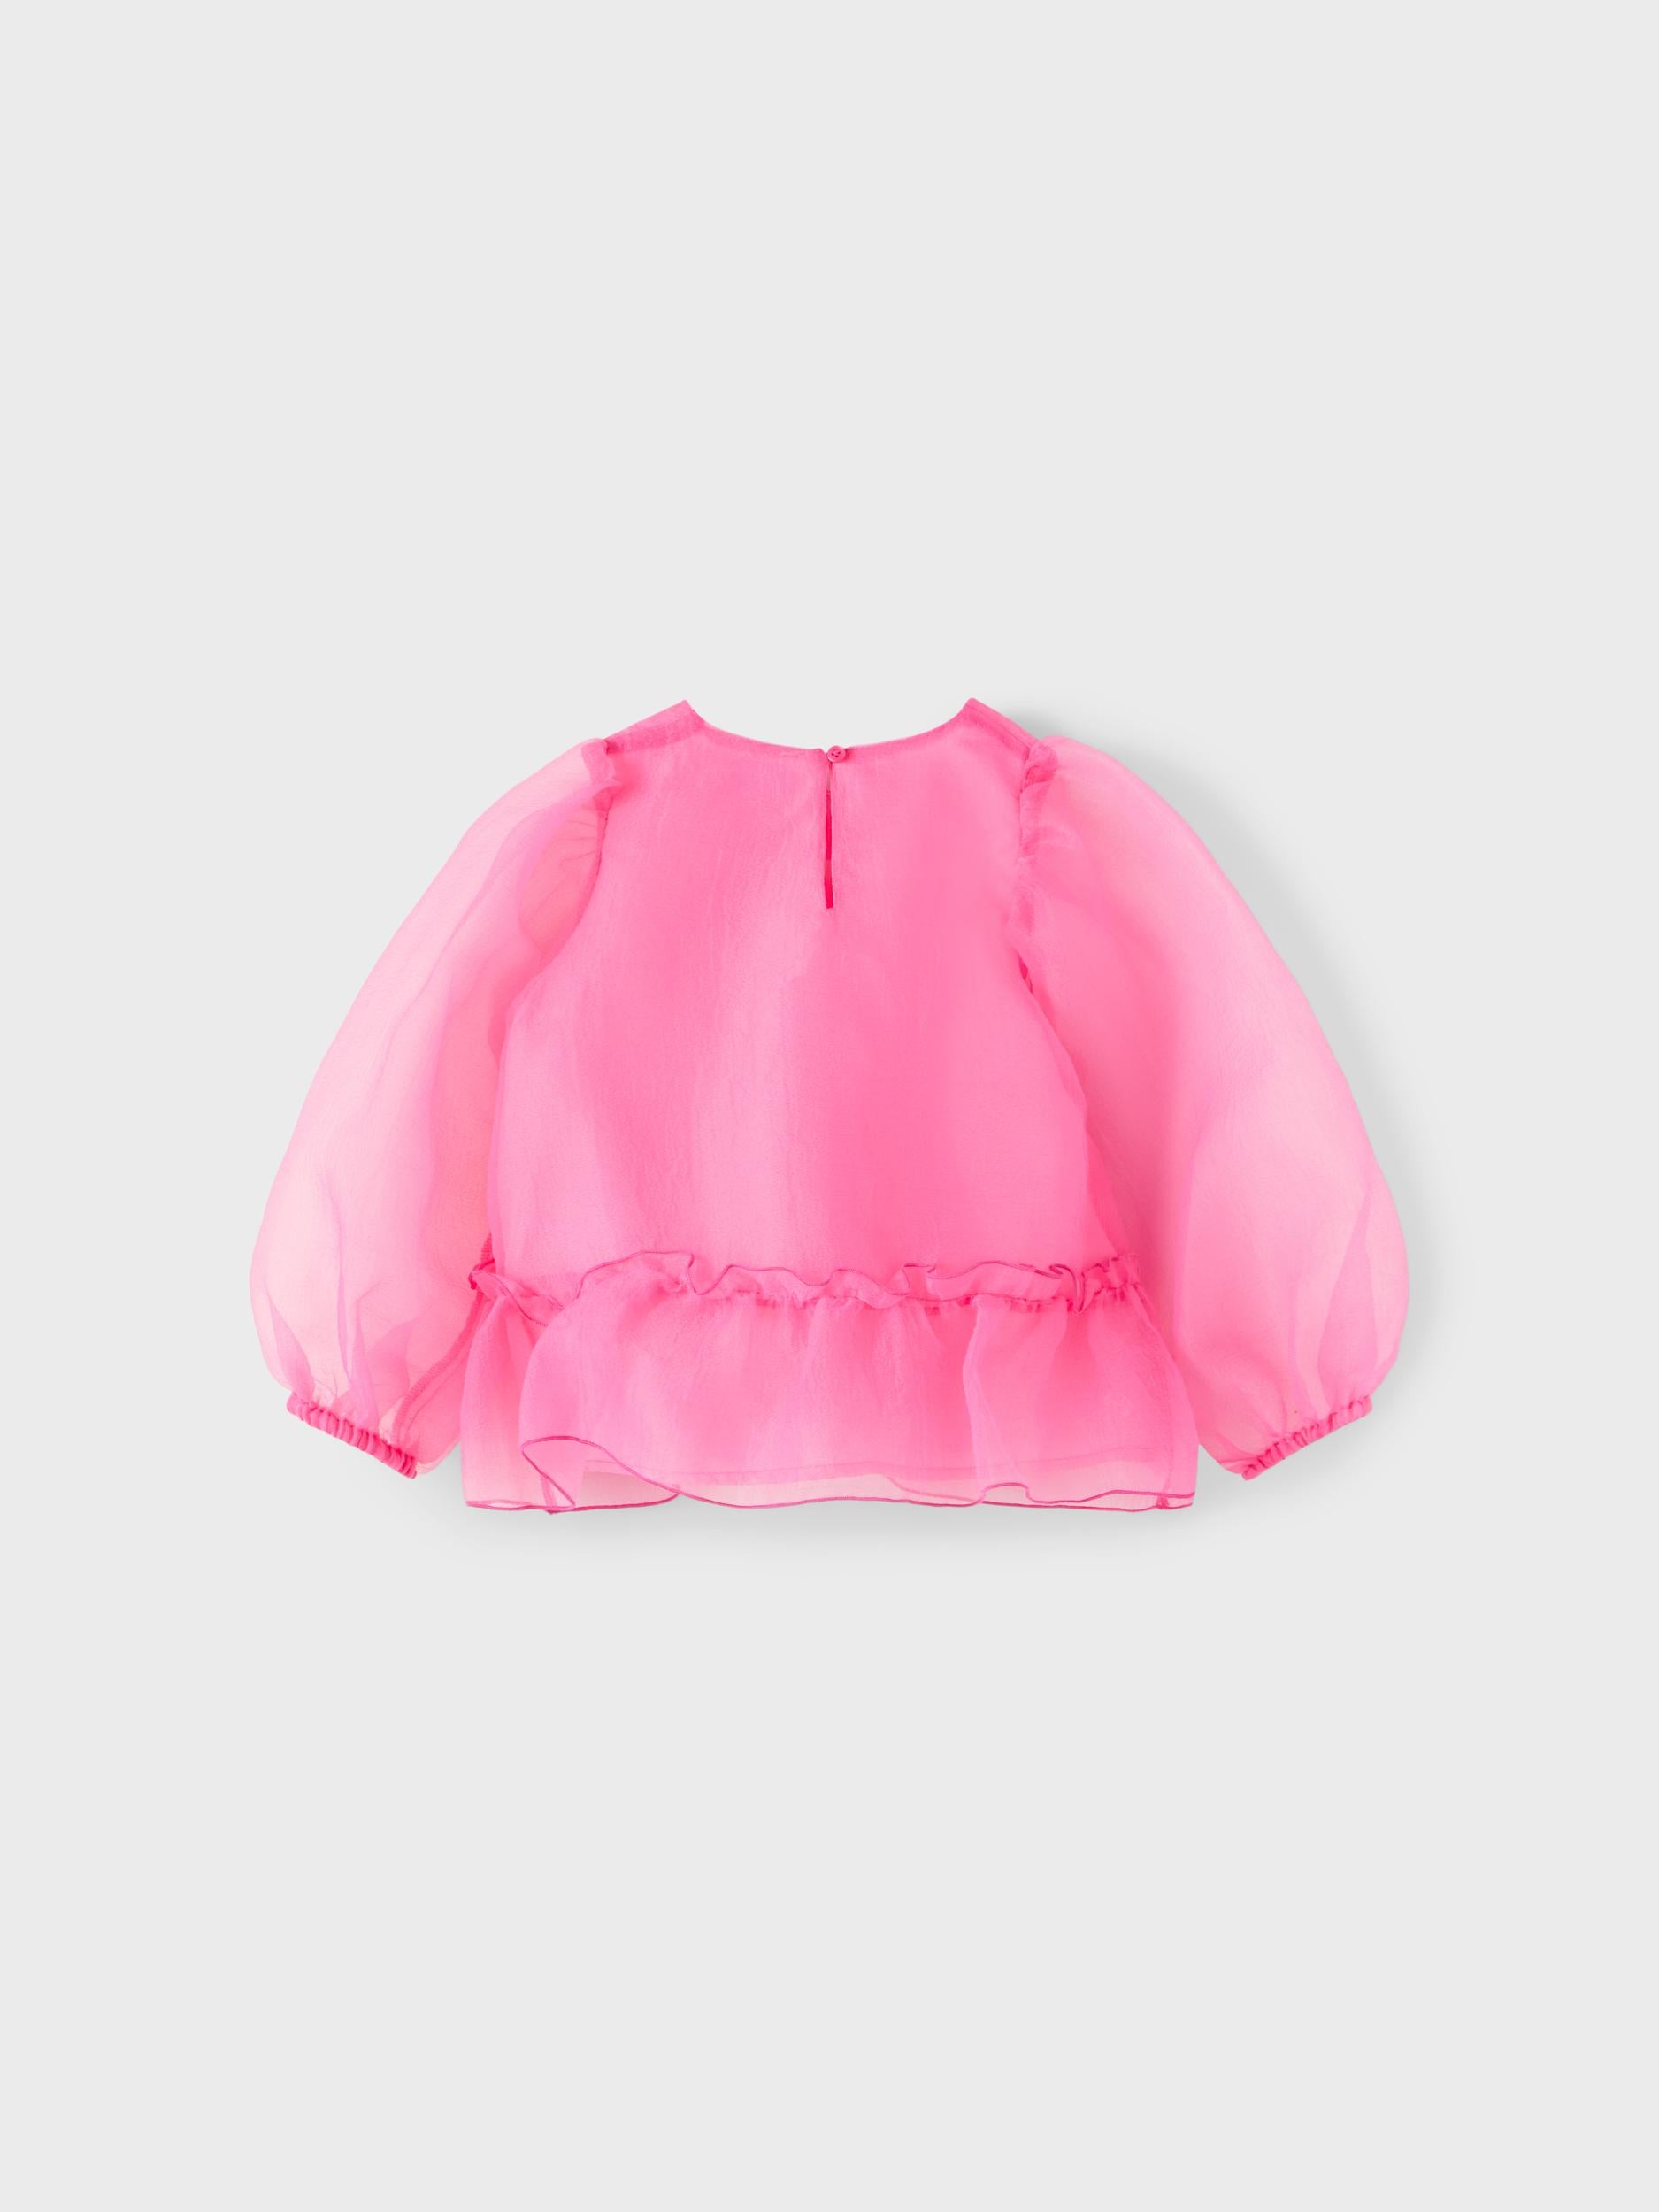 Girl's Runas Pink Top-Back View